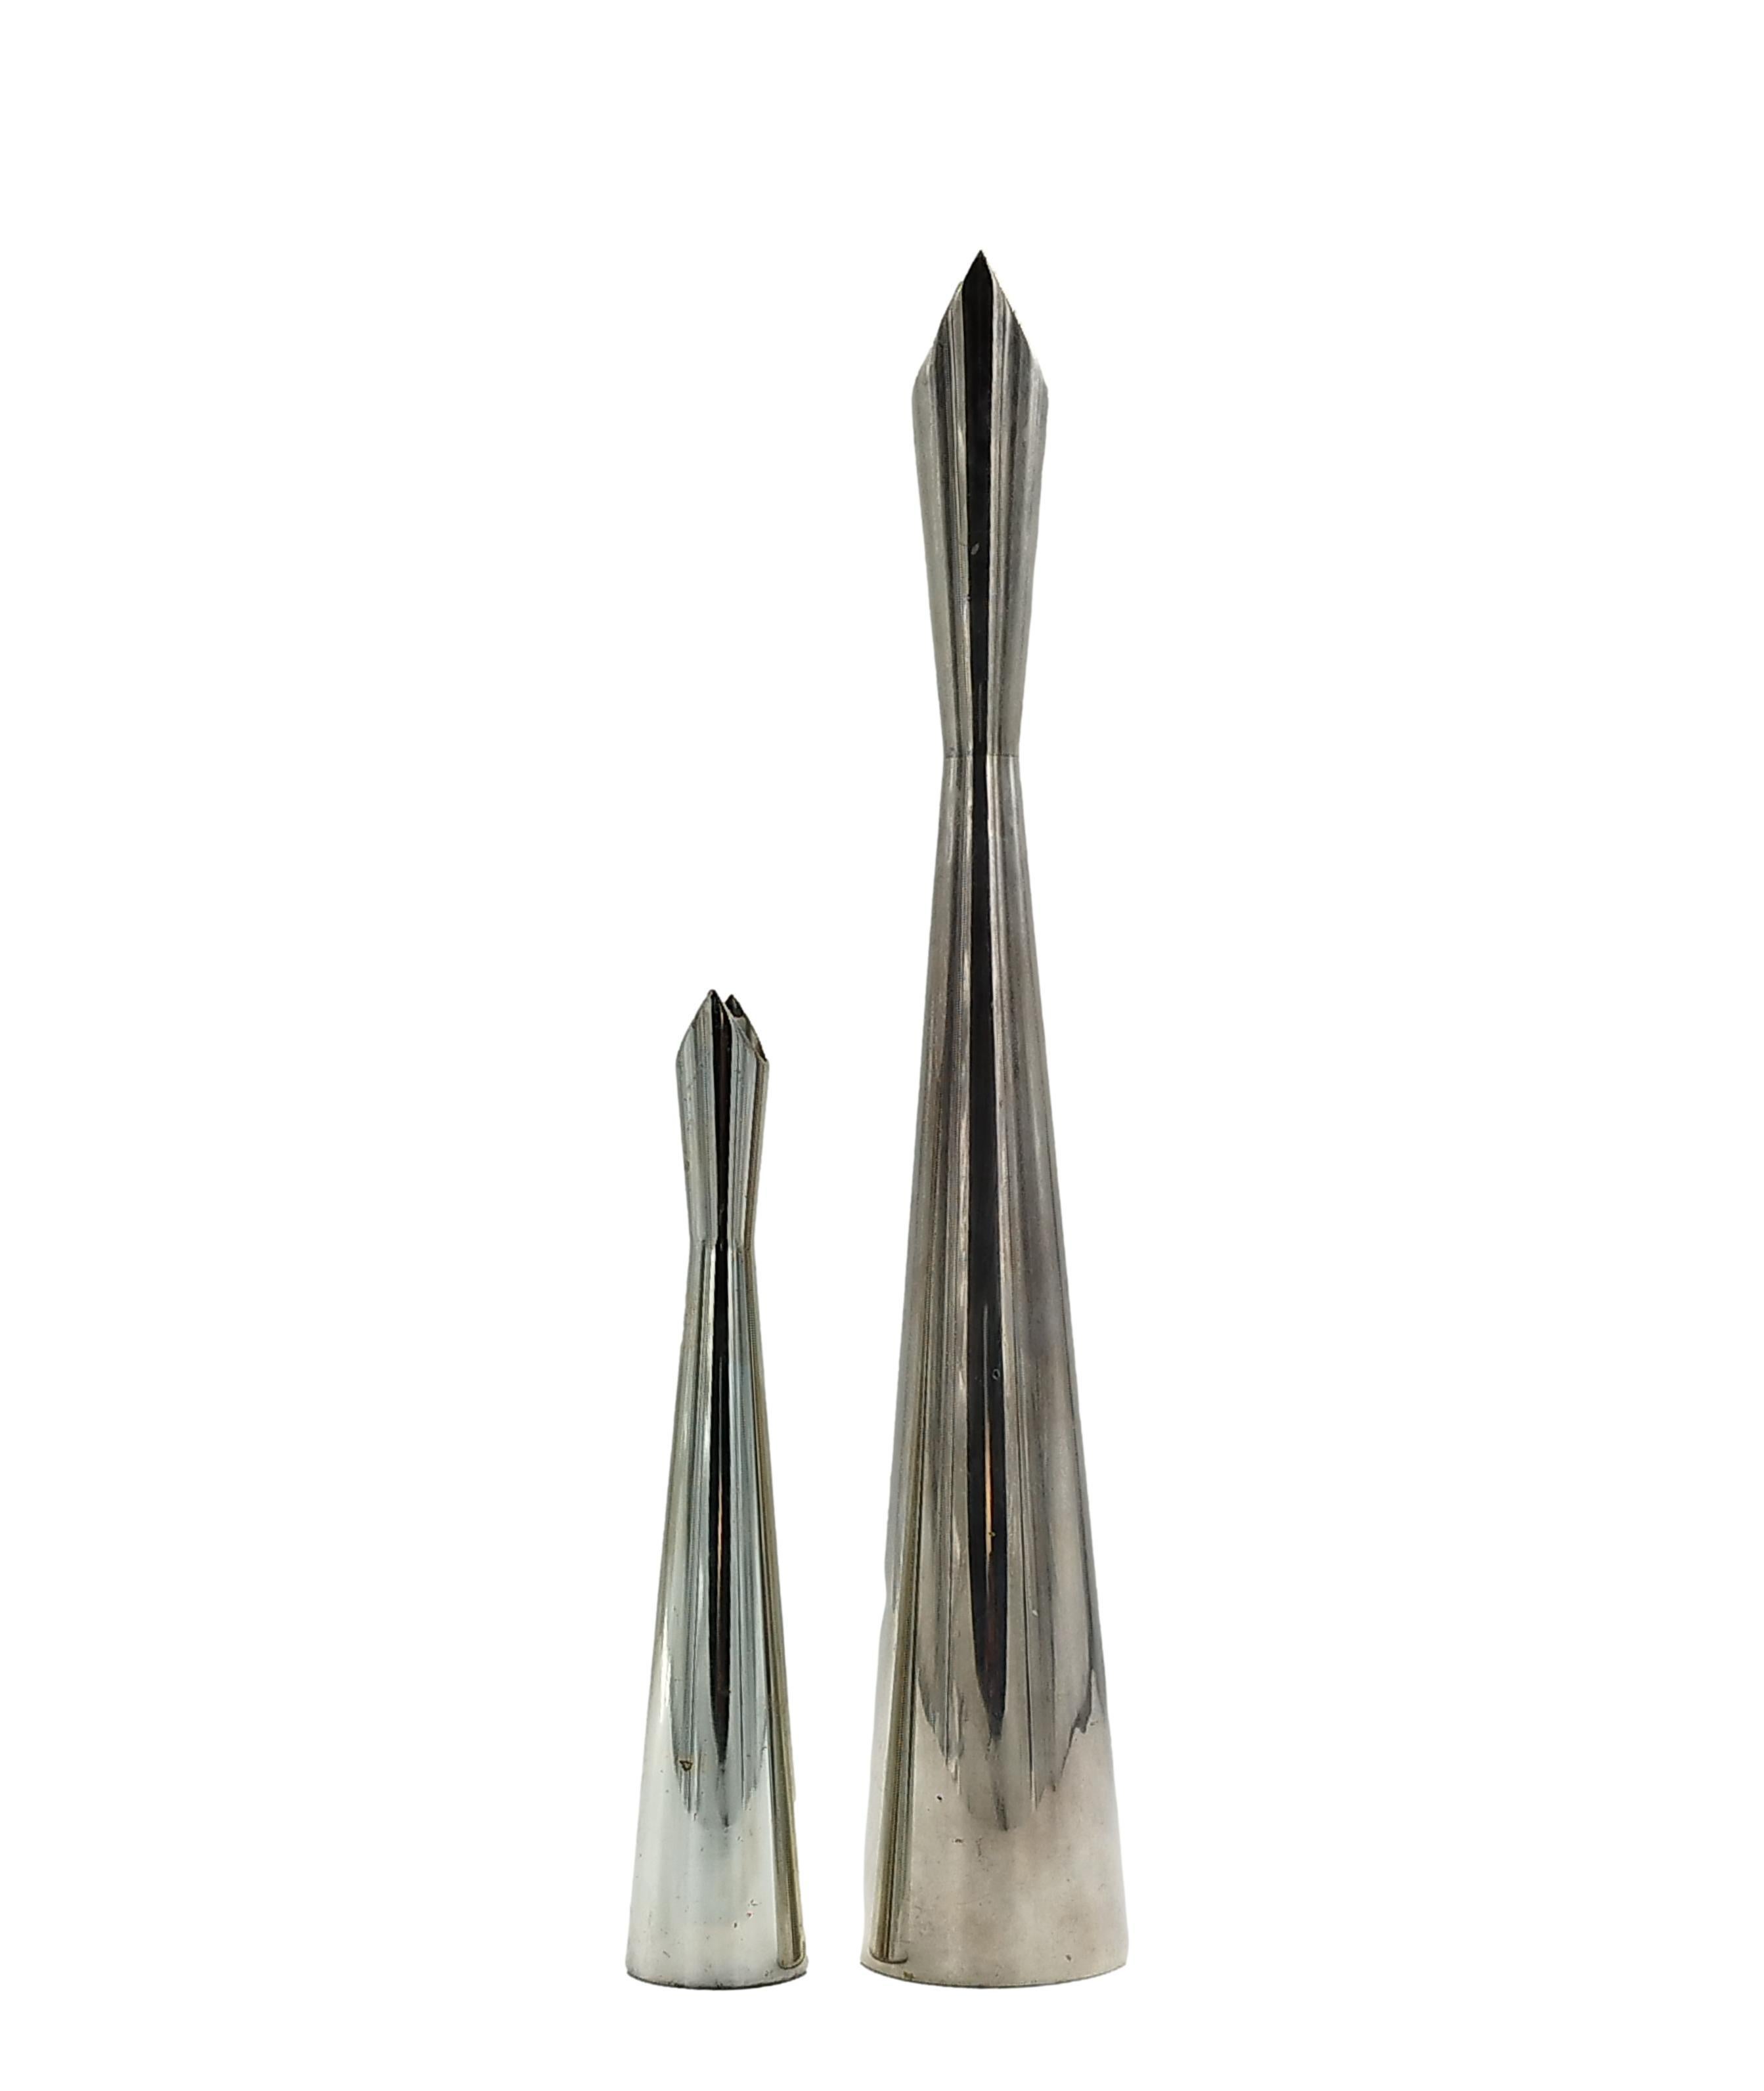 Set of two Mod. 'Cardinali' vases in silver-plated metal designed by Lino Sabattini for Christofle in the 1950s, 
Little size cm. 20x4x4.